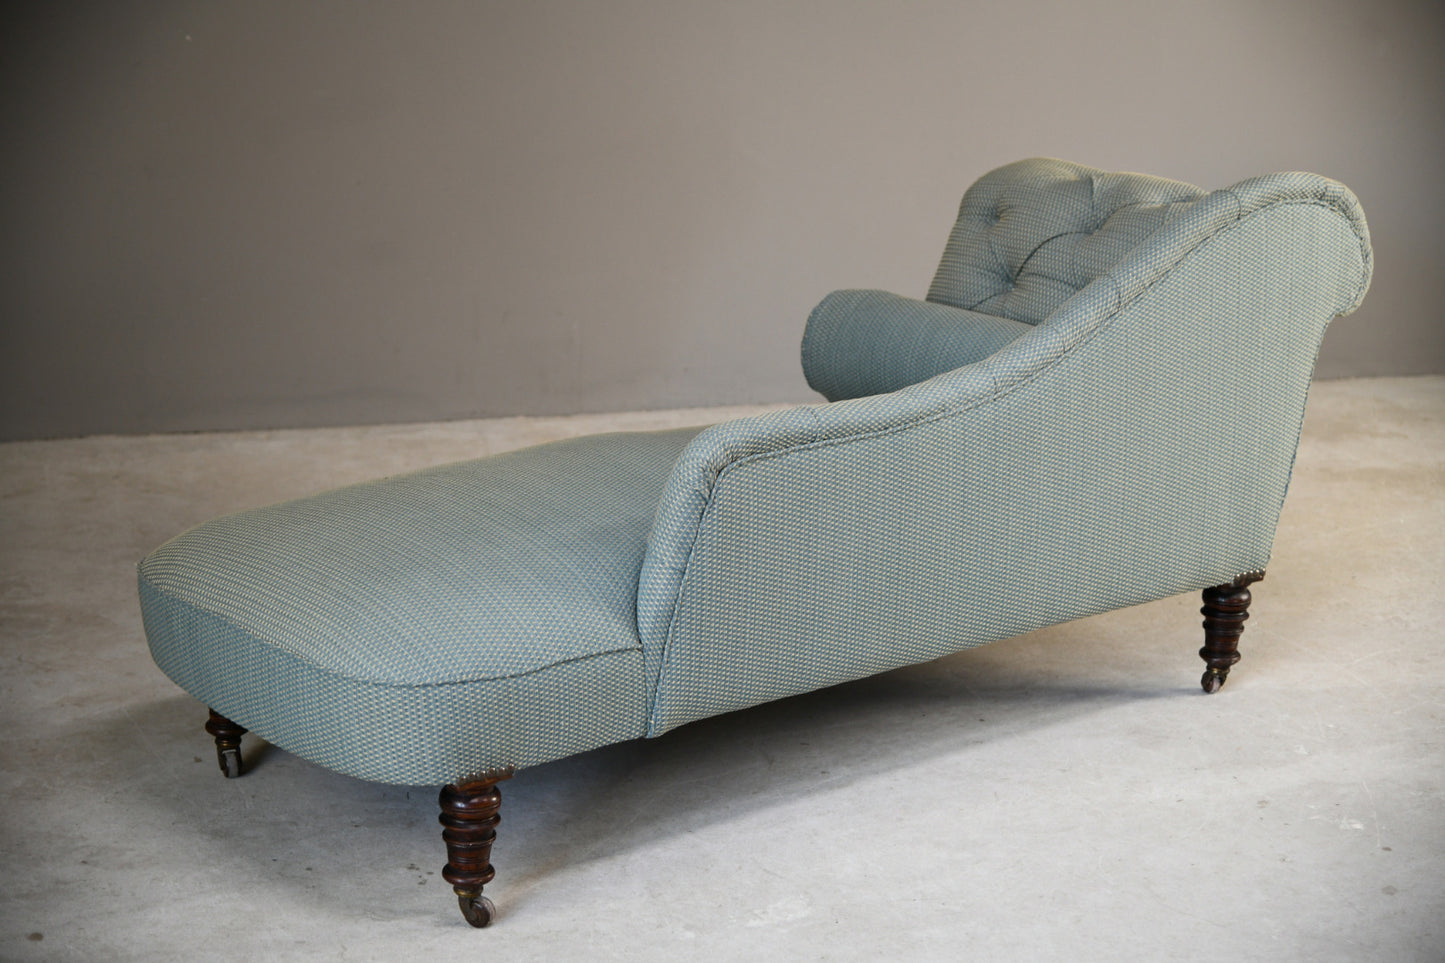 Antique Upholstered Chaise Longue